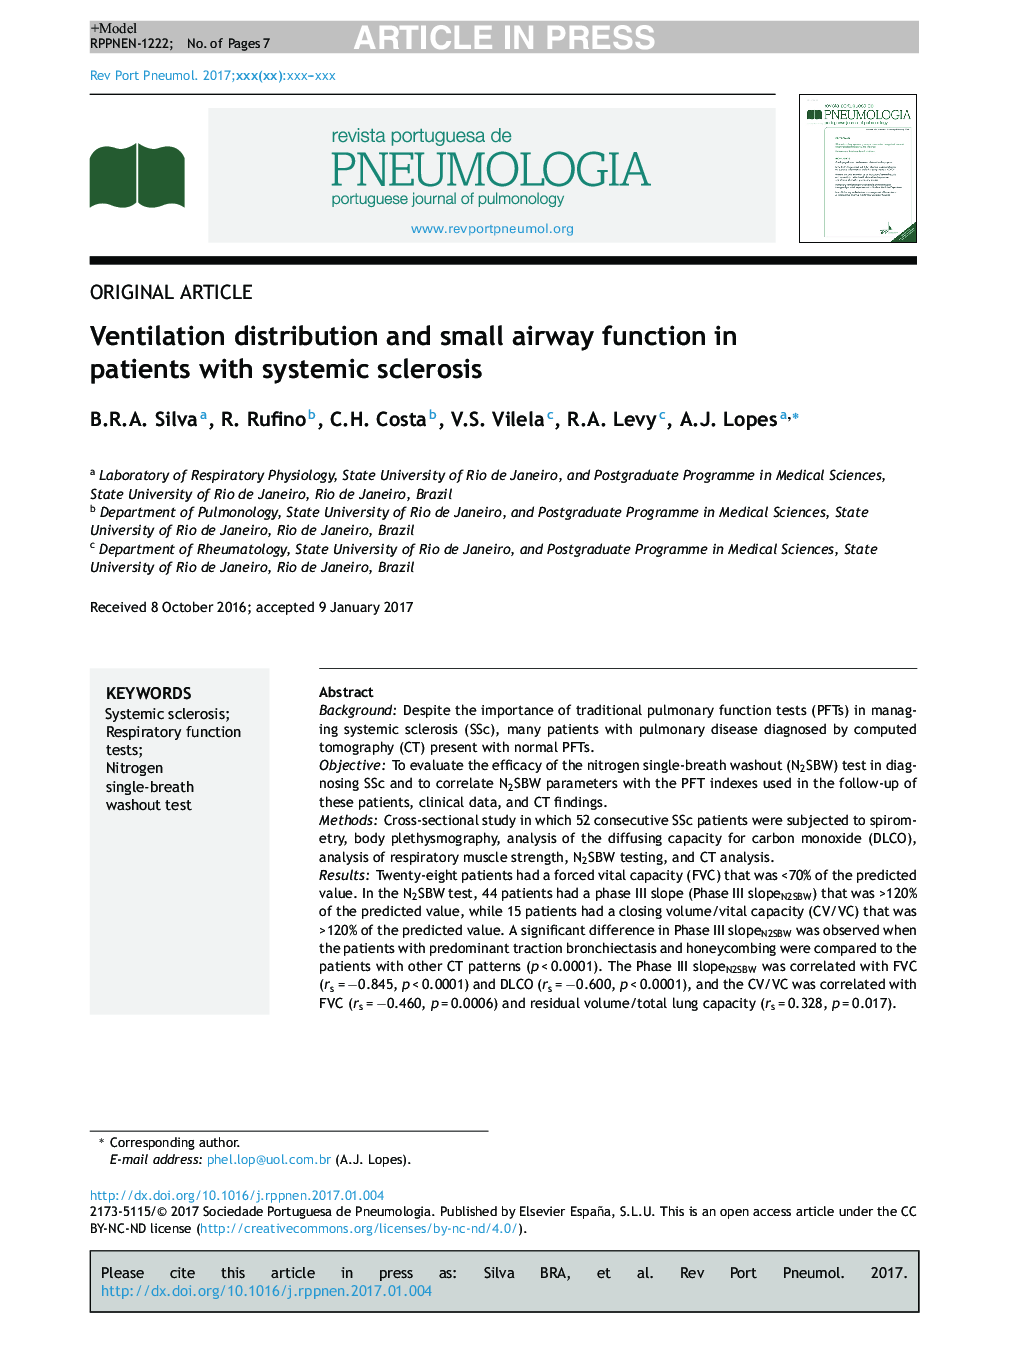 Ventilation distribution and small airway function in patients with systemic sclerosis